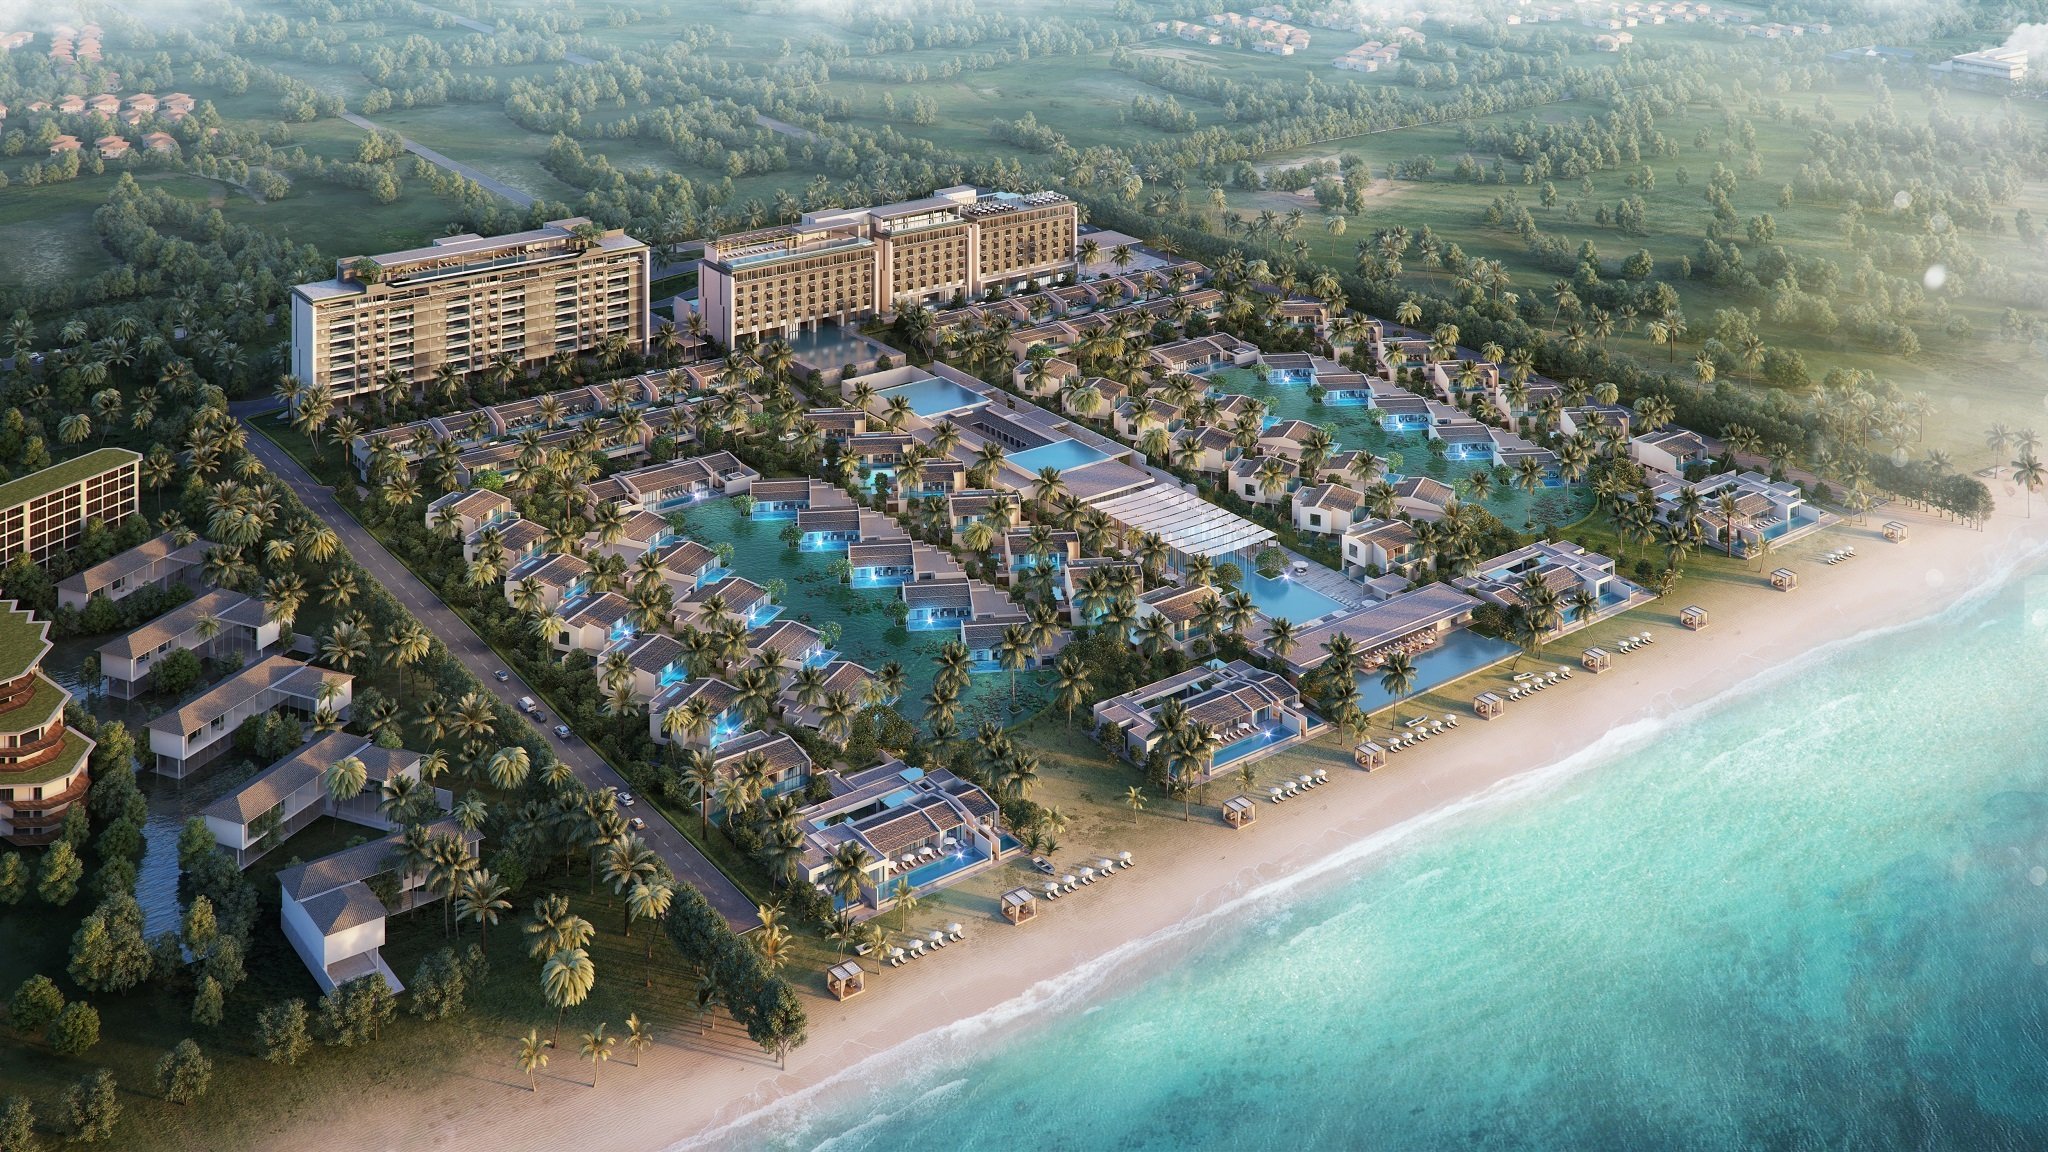 Regent Residences Phu Quoc: Regent Residences Phu Quoc, a luxurious paradise on the pearl island, welcomes you to indulge in the ultimate vacation experience. The magnificent design combined with cutting-edge amenities and the stunning beachfront location will leave you in awe. Join us to make unforgettable memories.